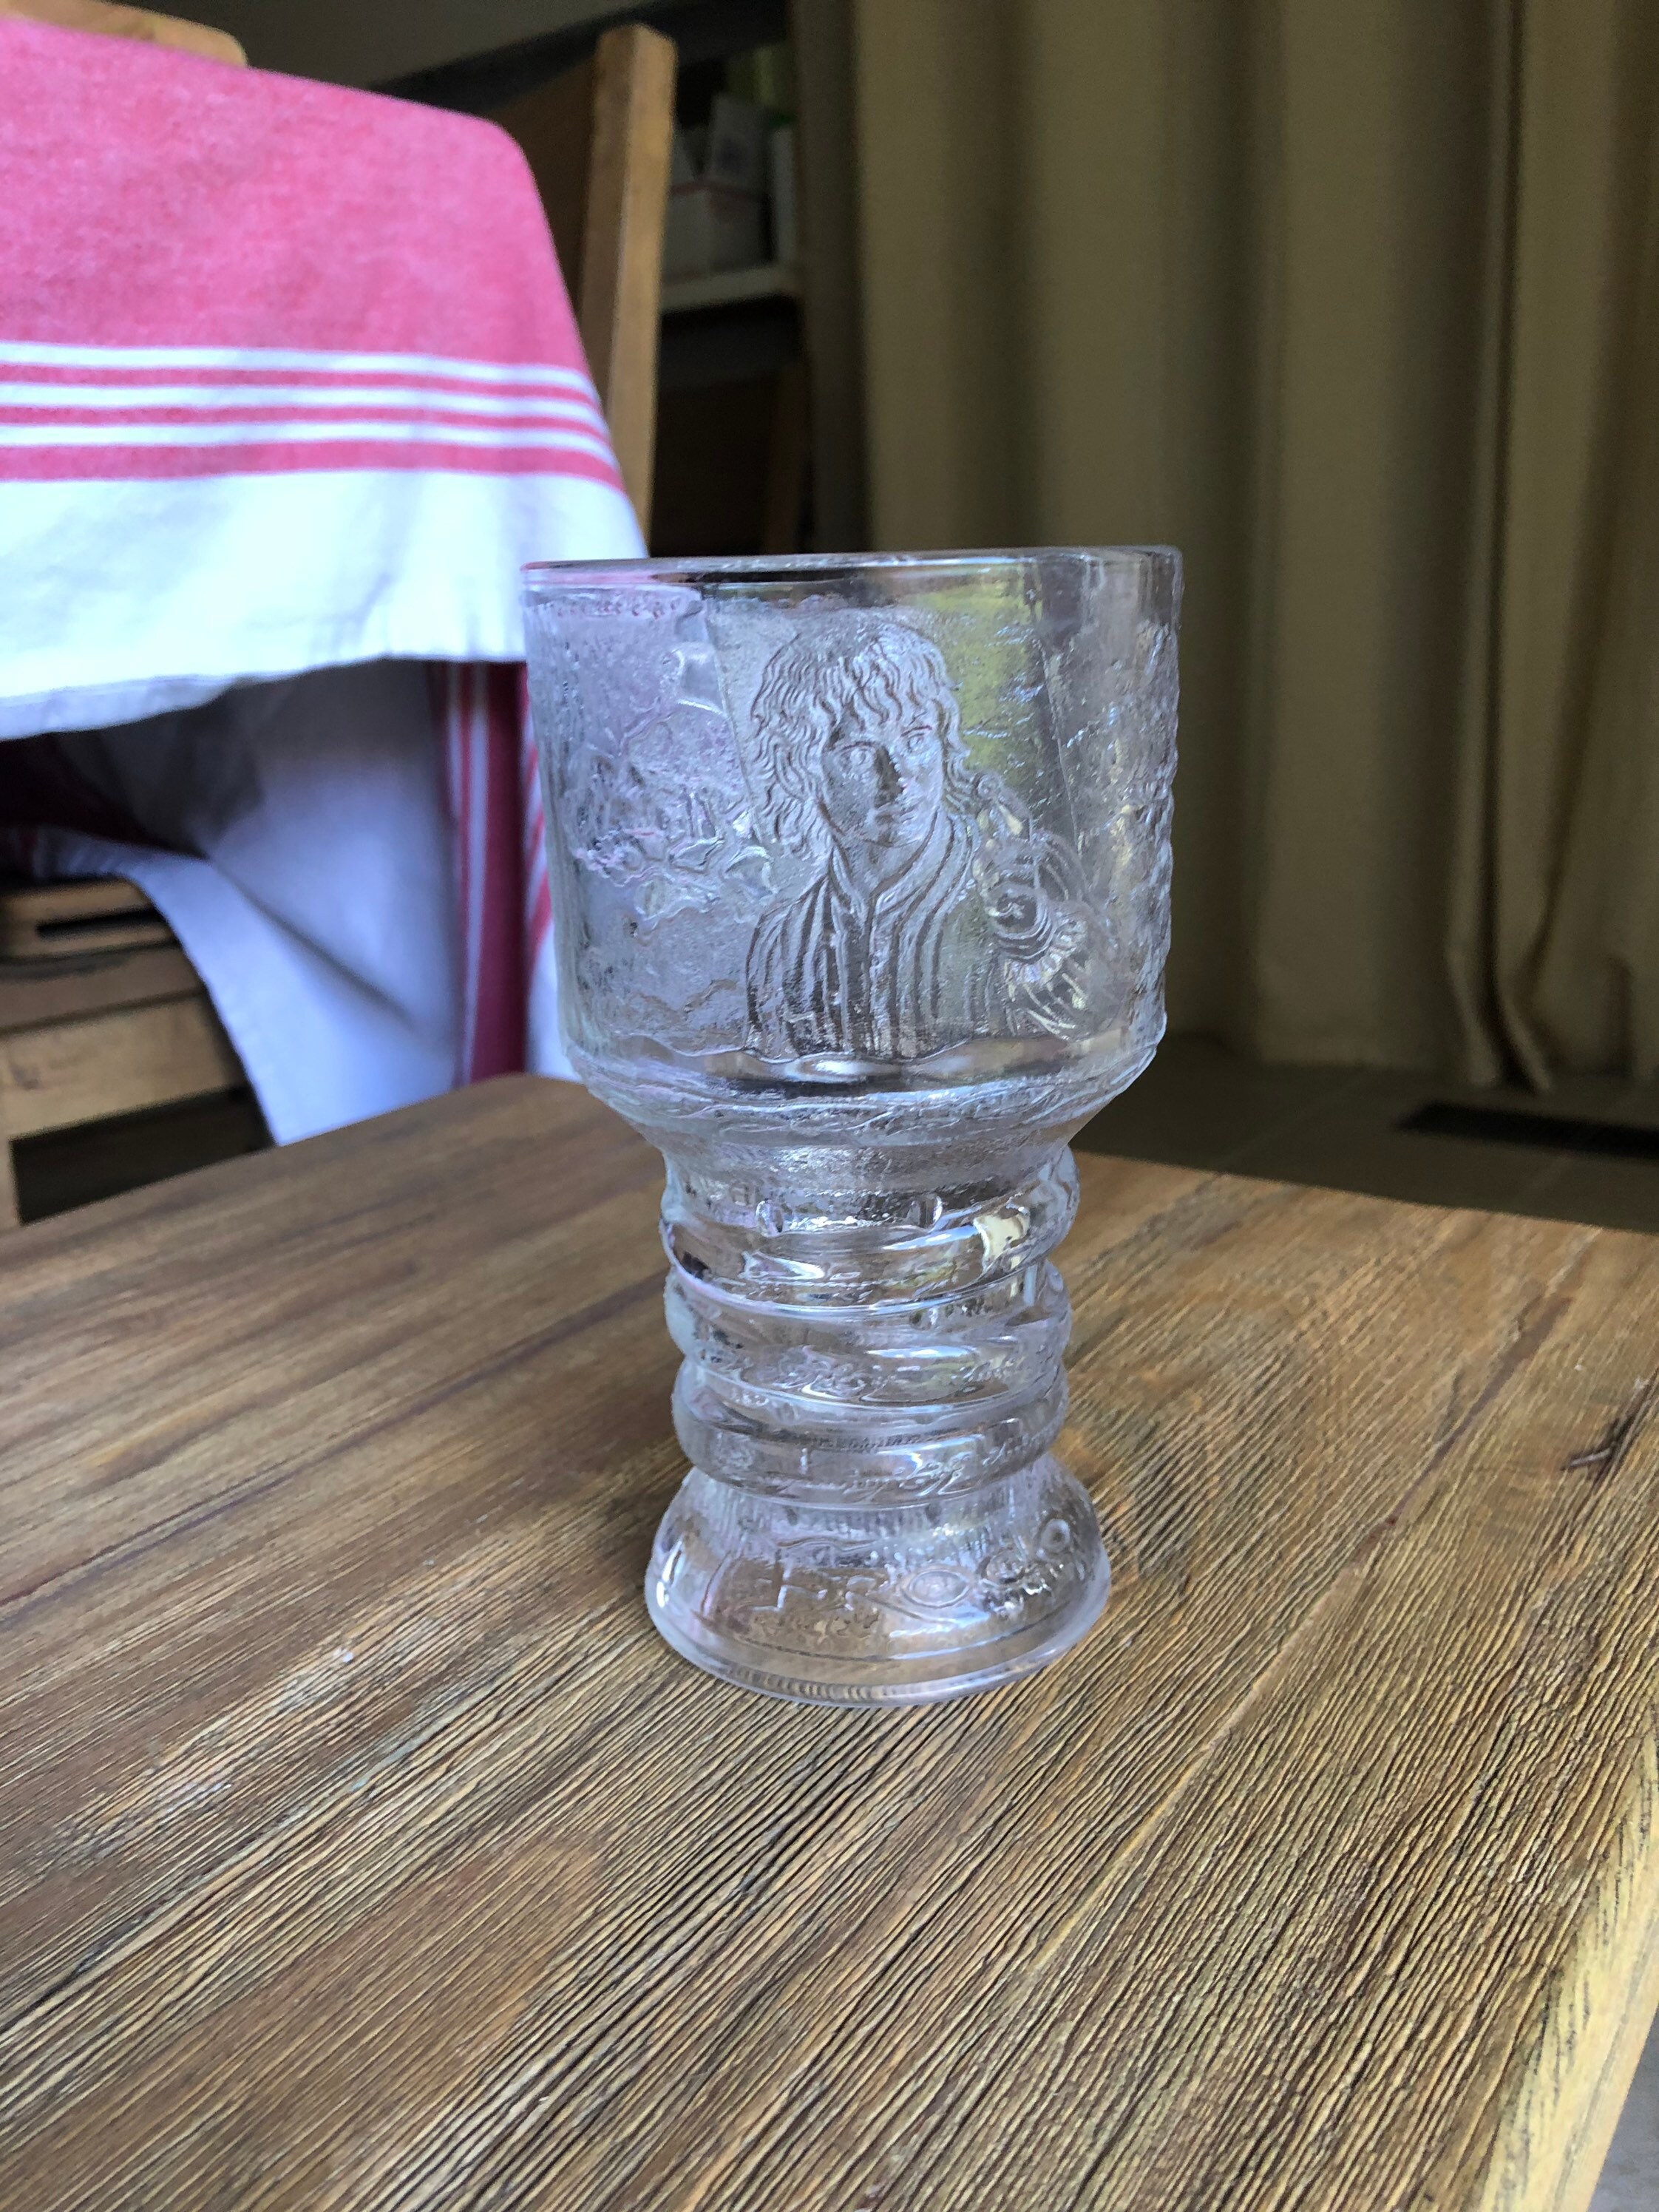 Vintage Lord of the Rings goblet Etsy